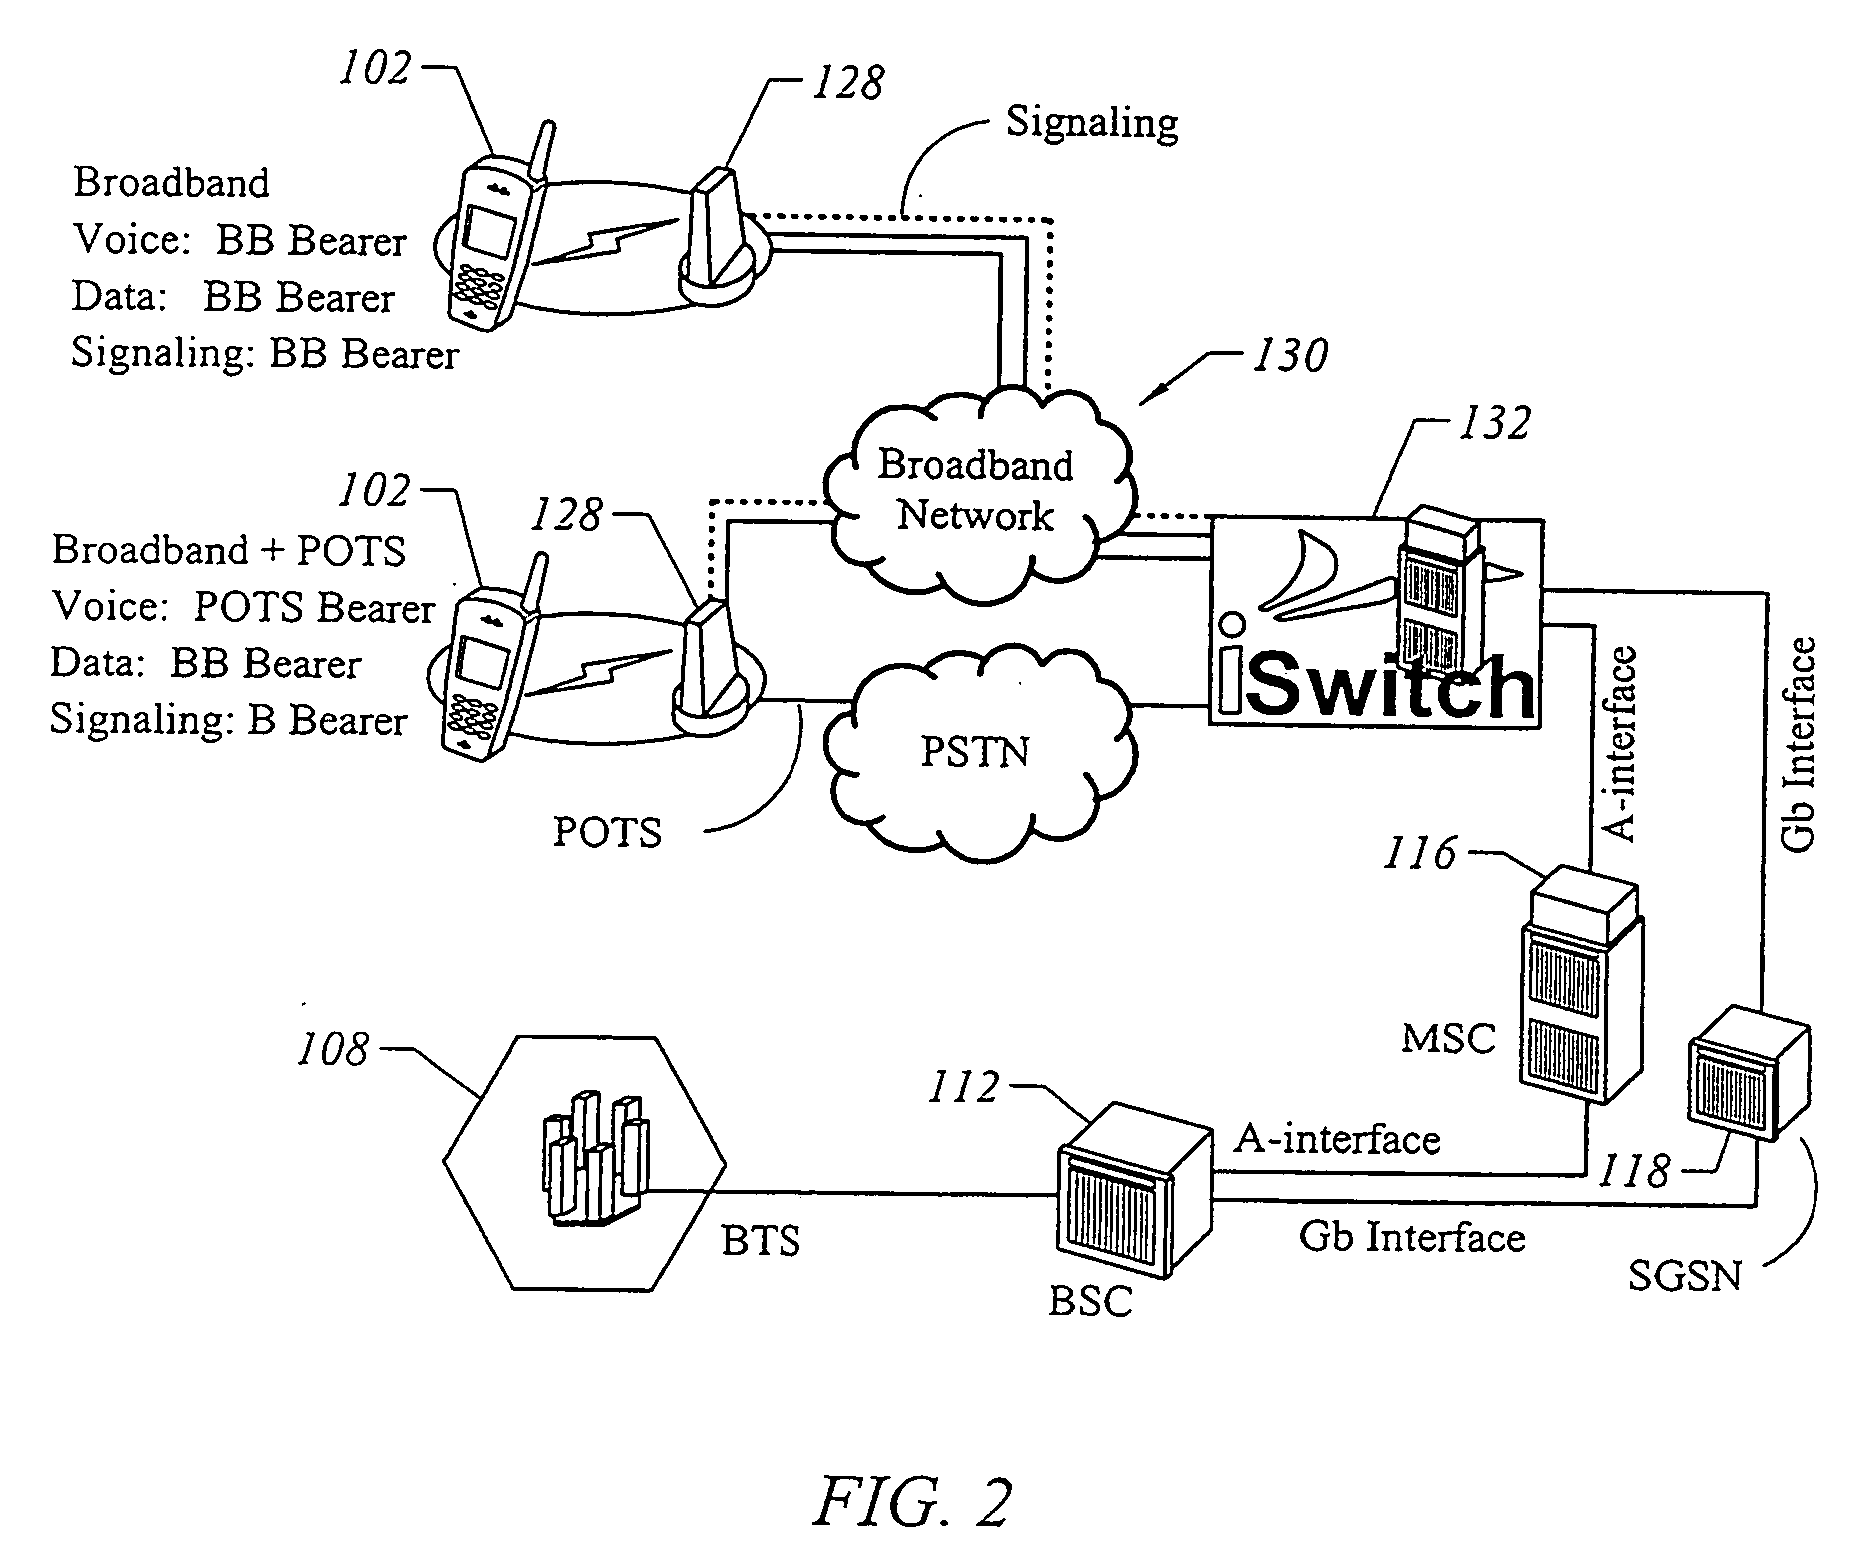 GPRS data protocol architecture for an unlicensed wireless communication system